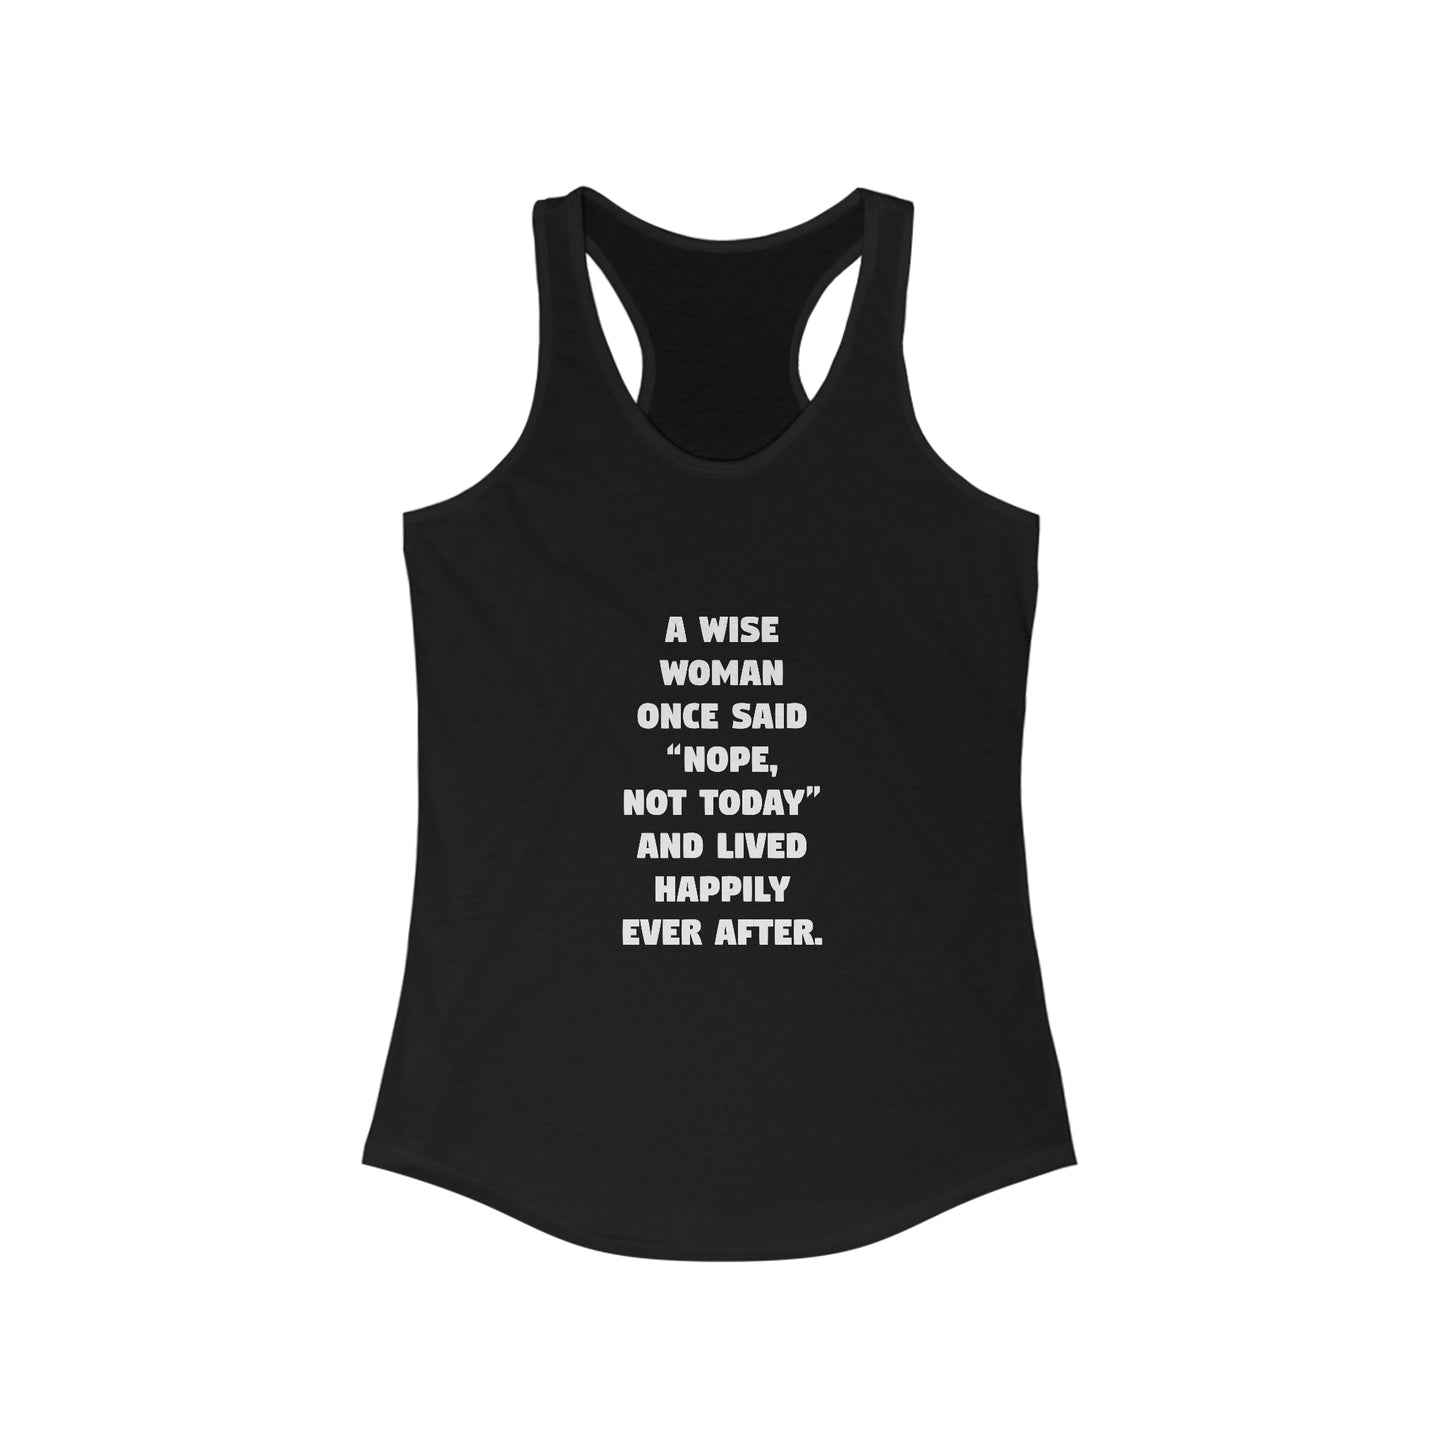 A Wise Woman Once Said 'Nope, Not Today' and Lived Happily Ever After Women's Ideal Racerback Tank